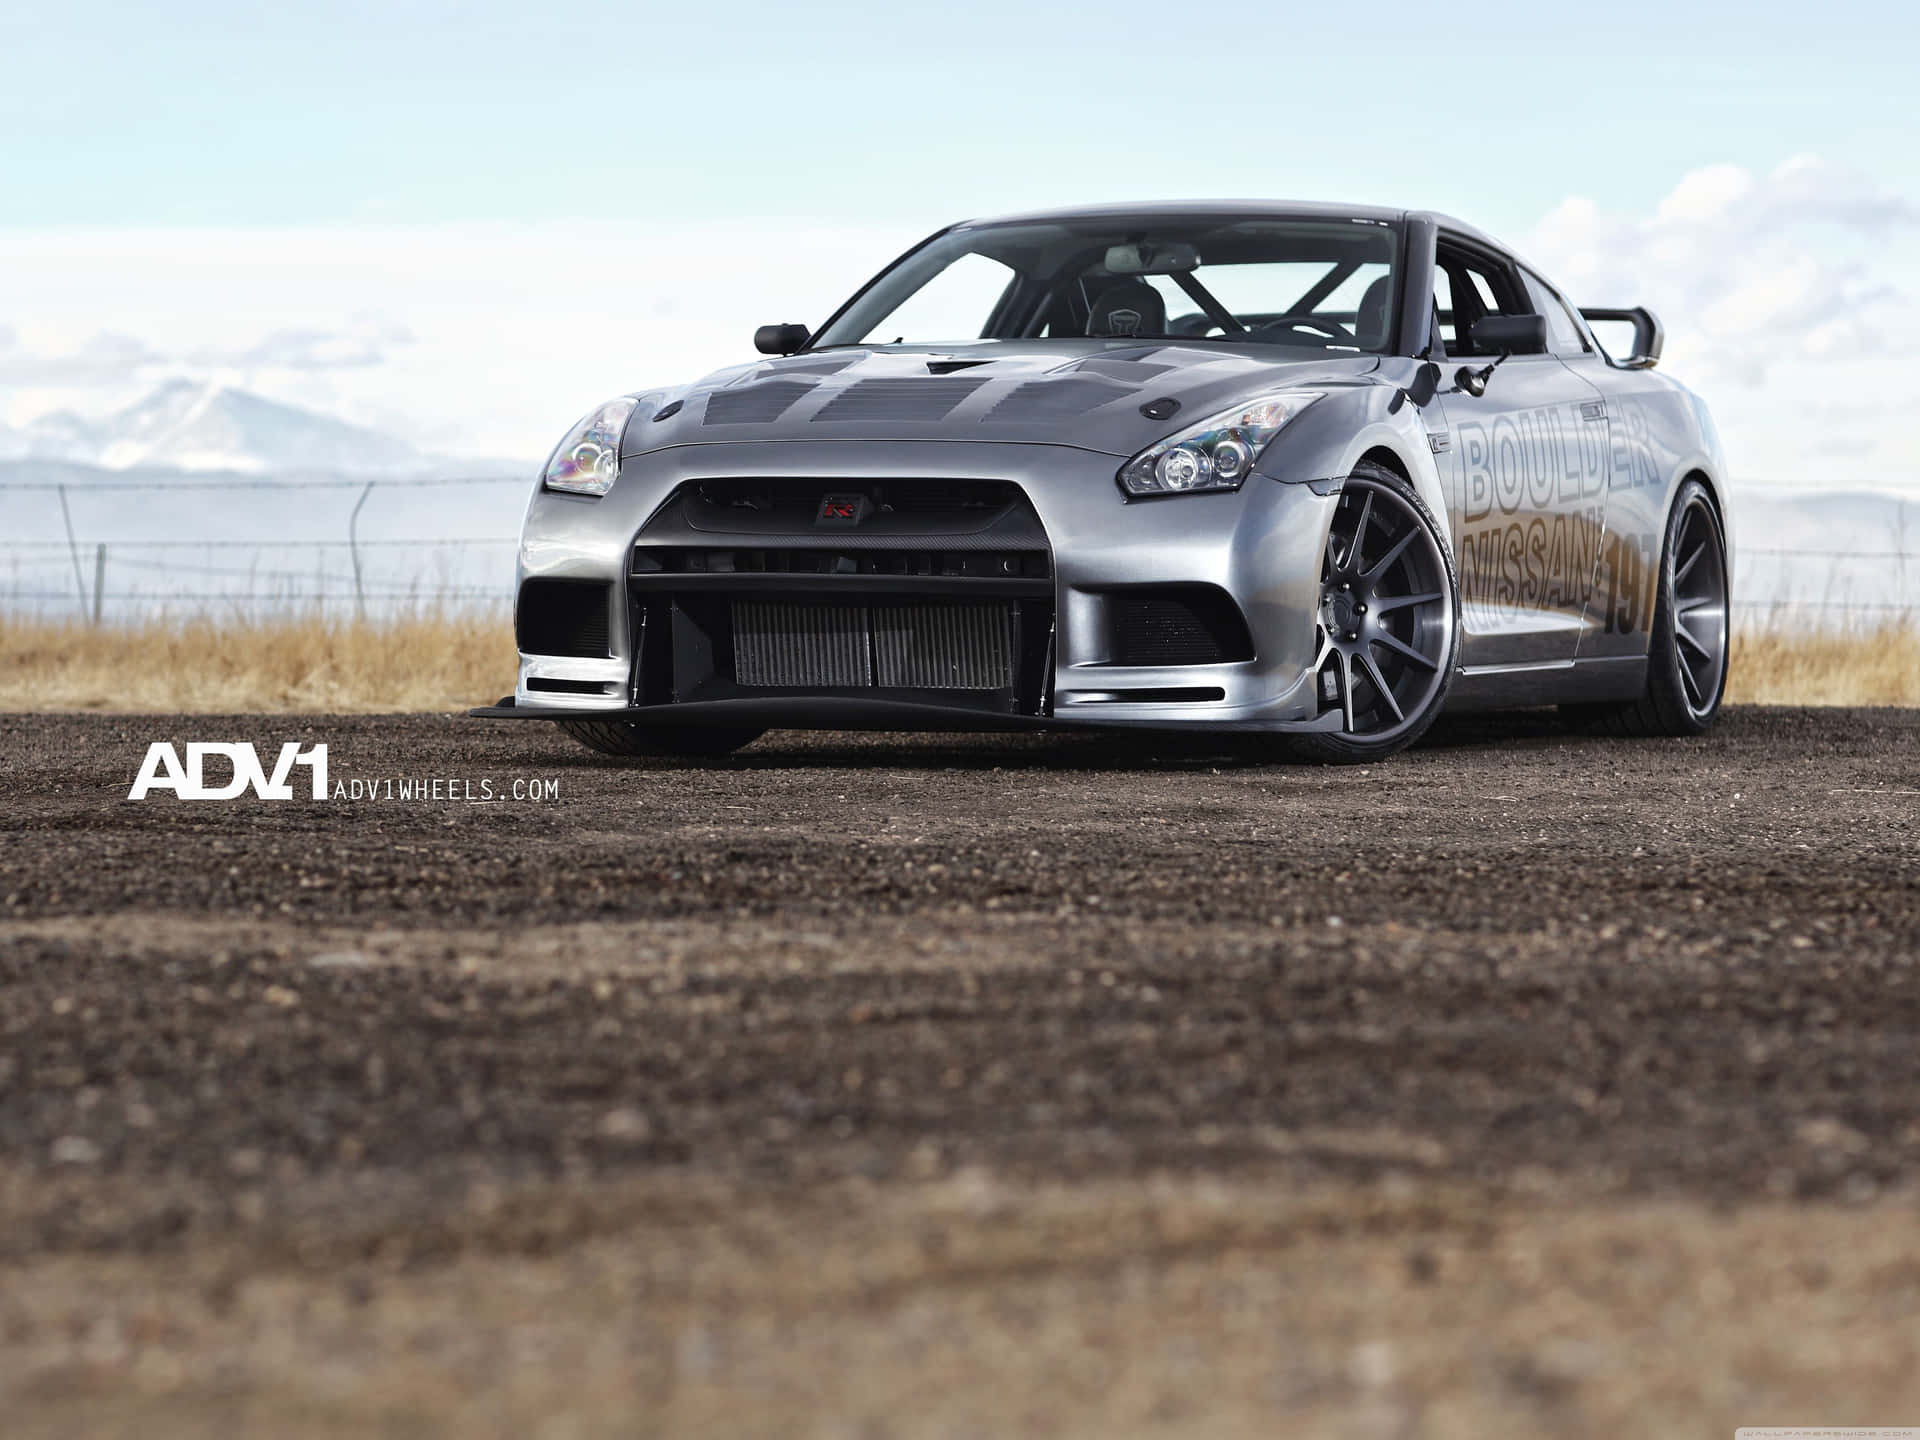 The Coolest Gtr On The Block